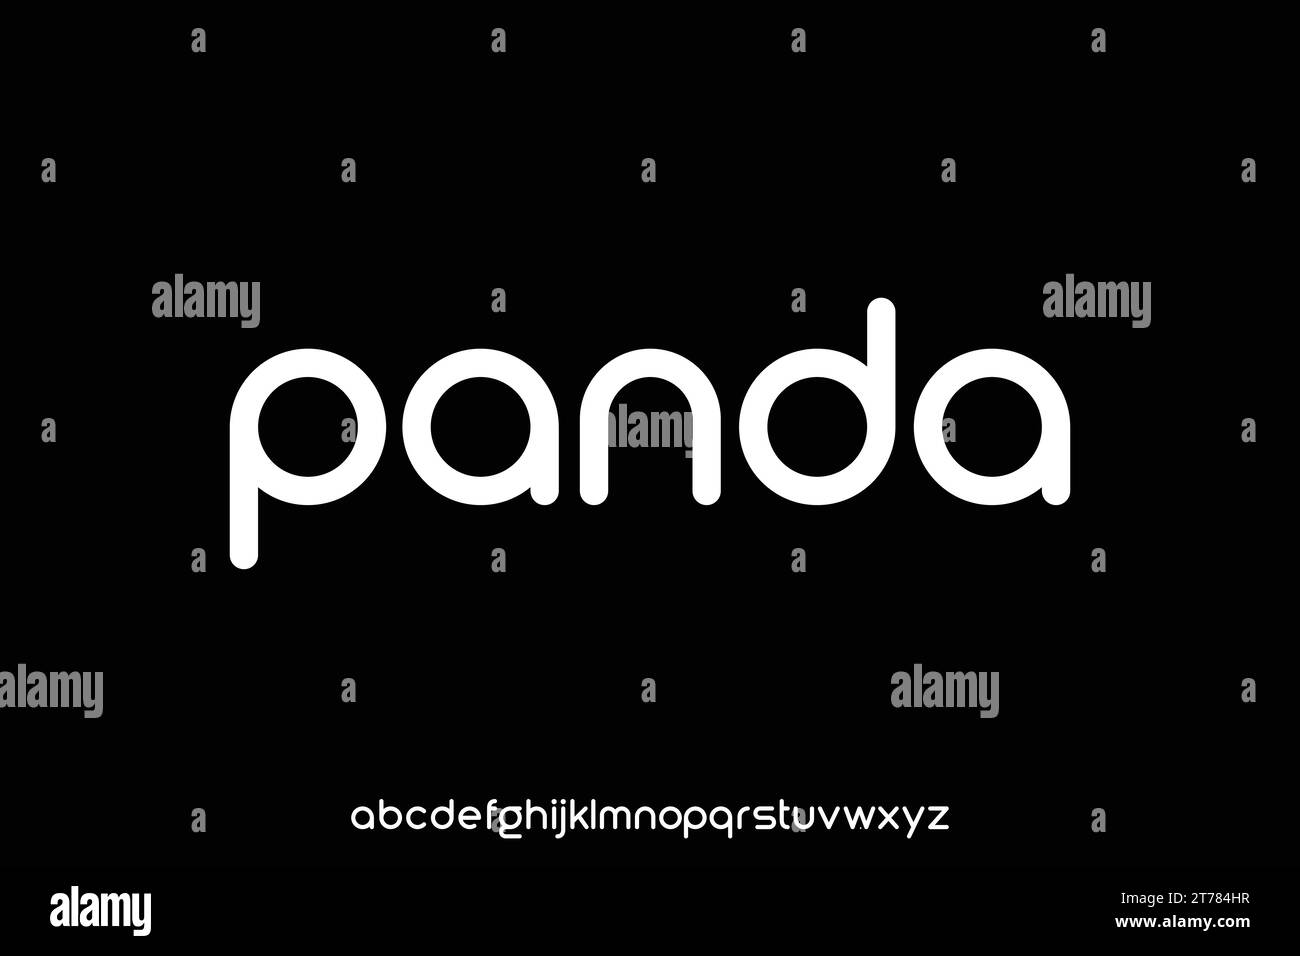 Playful rounded panda alphabet display font vector. Modern cute typography style Stock Vector